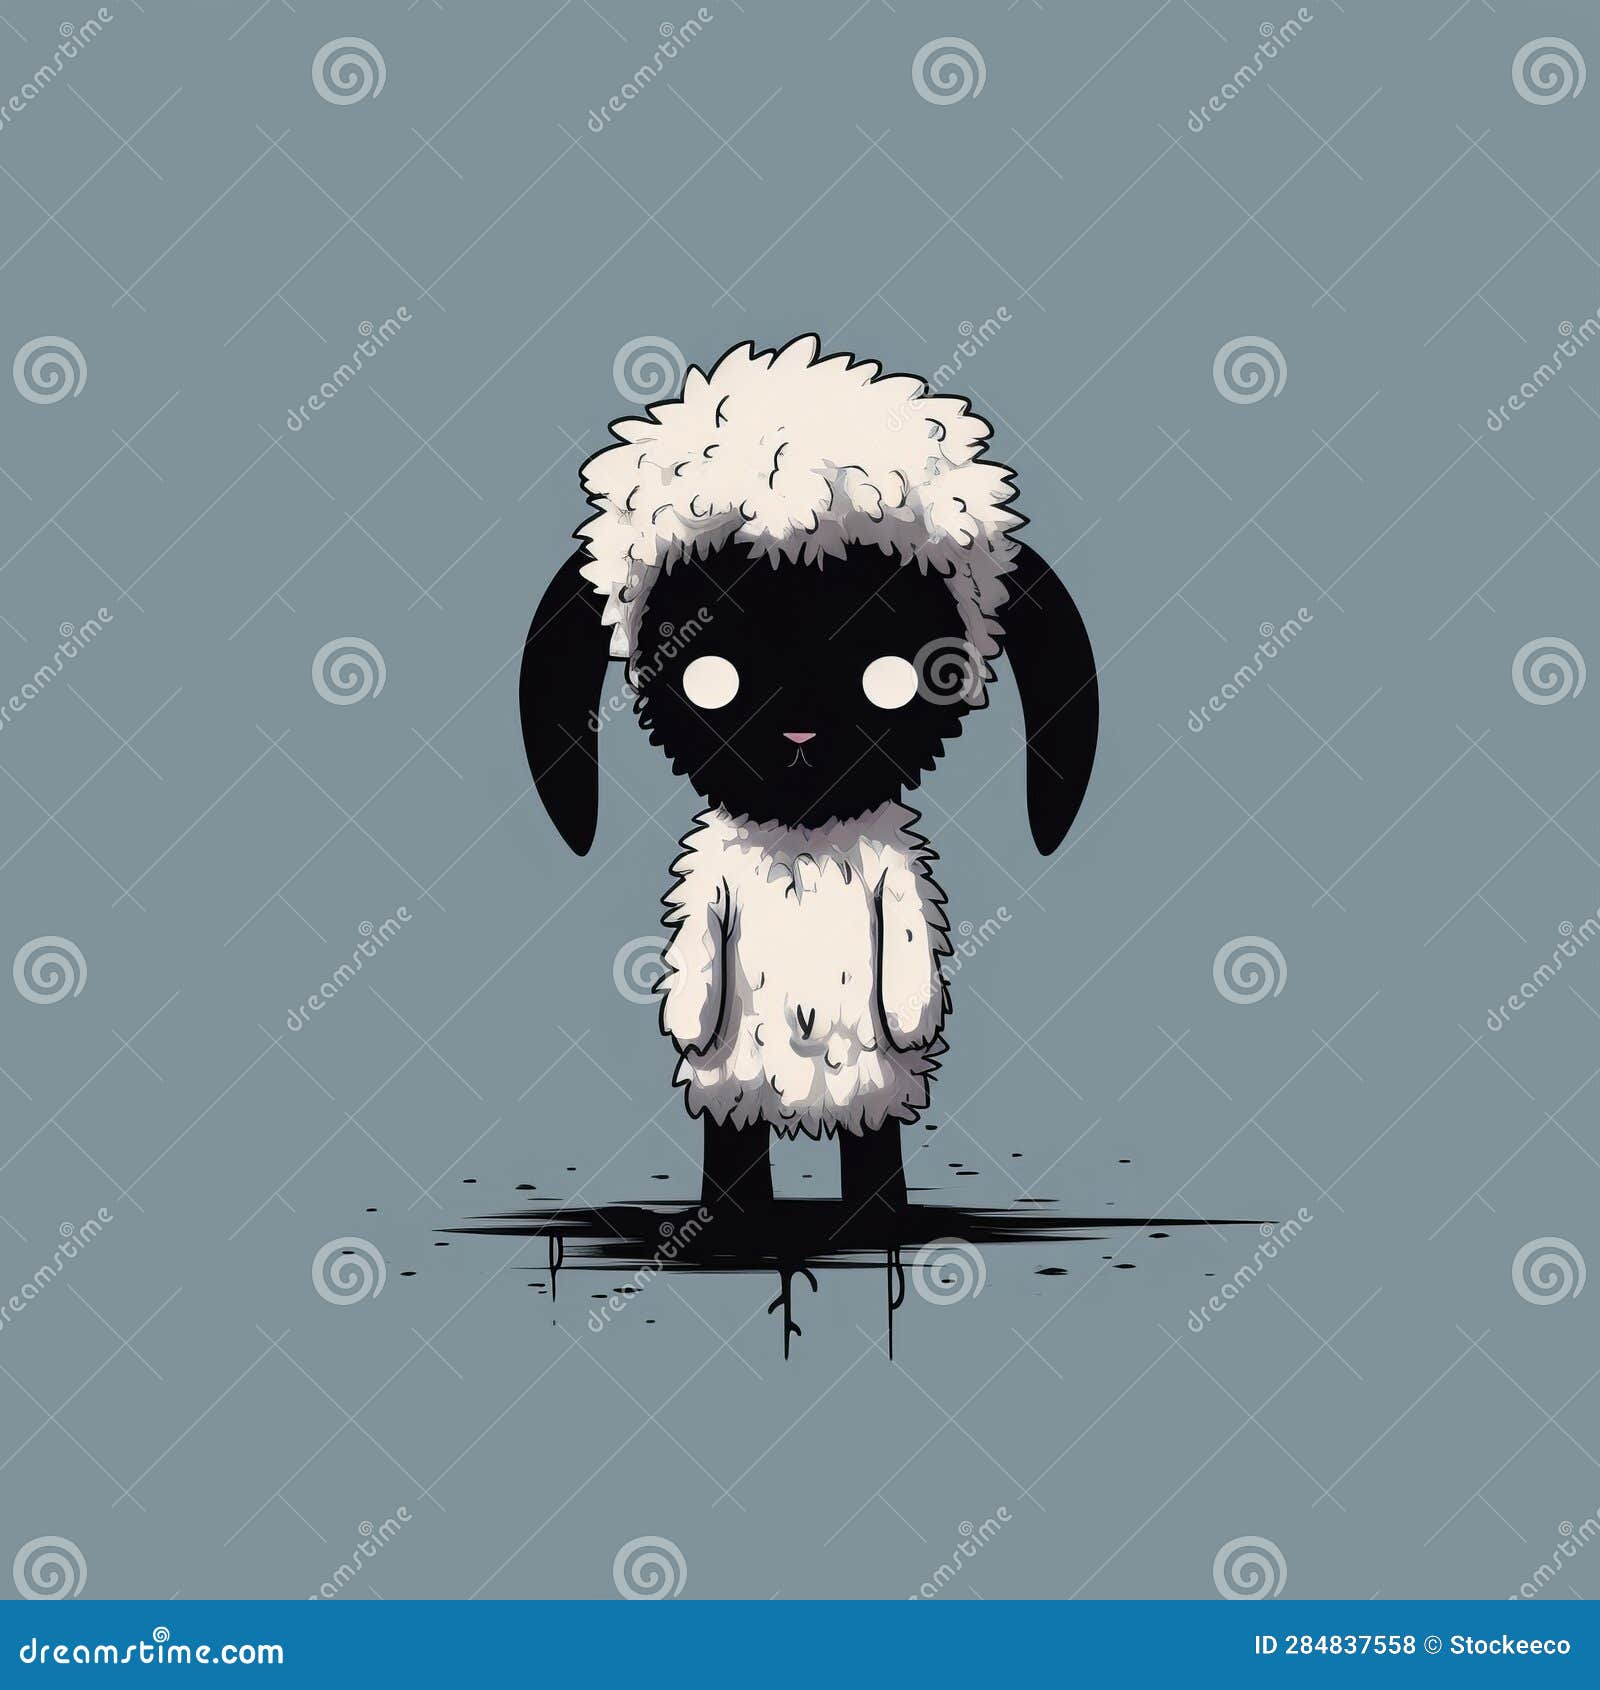 Pin by Crow on Calvin!! | Sheep illustration, Anime best friends, Anime